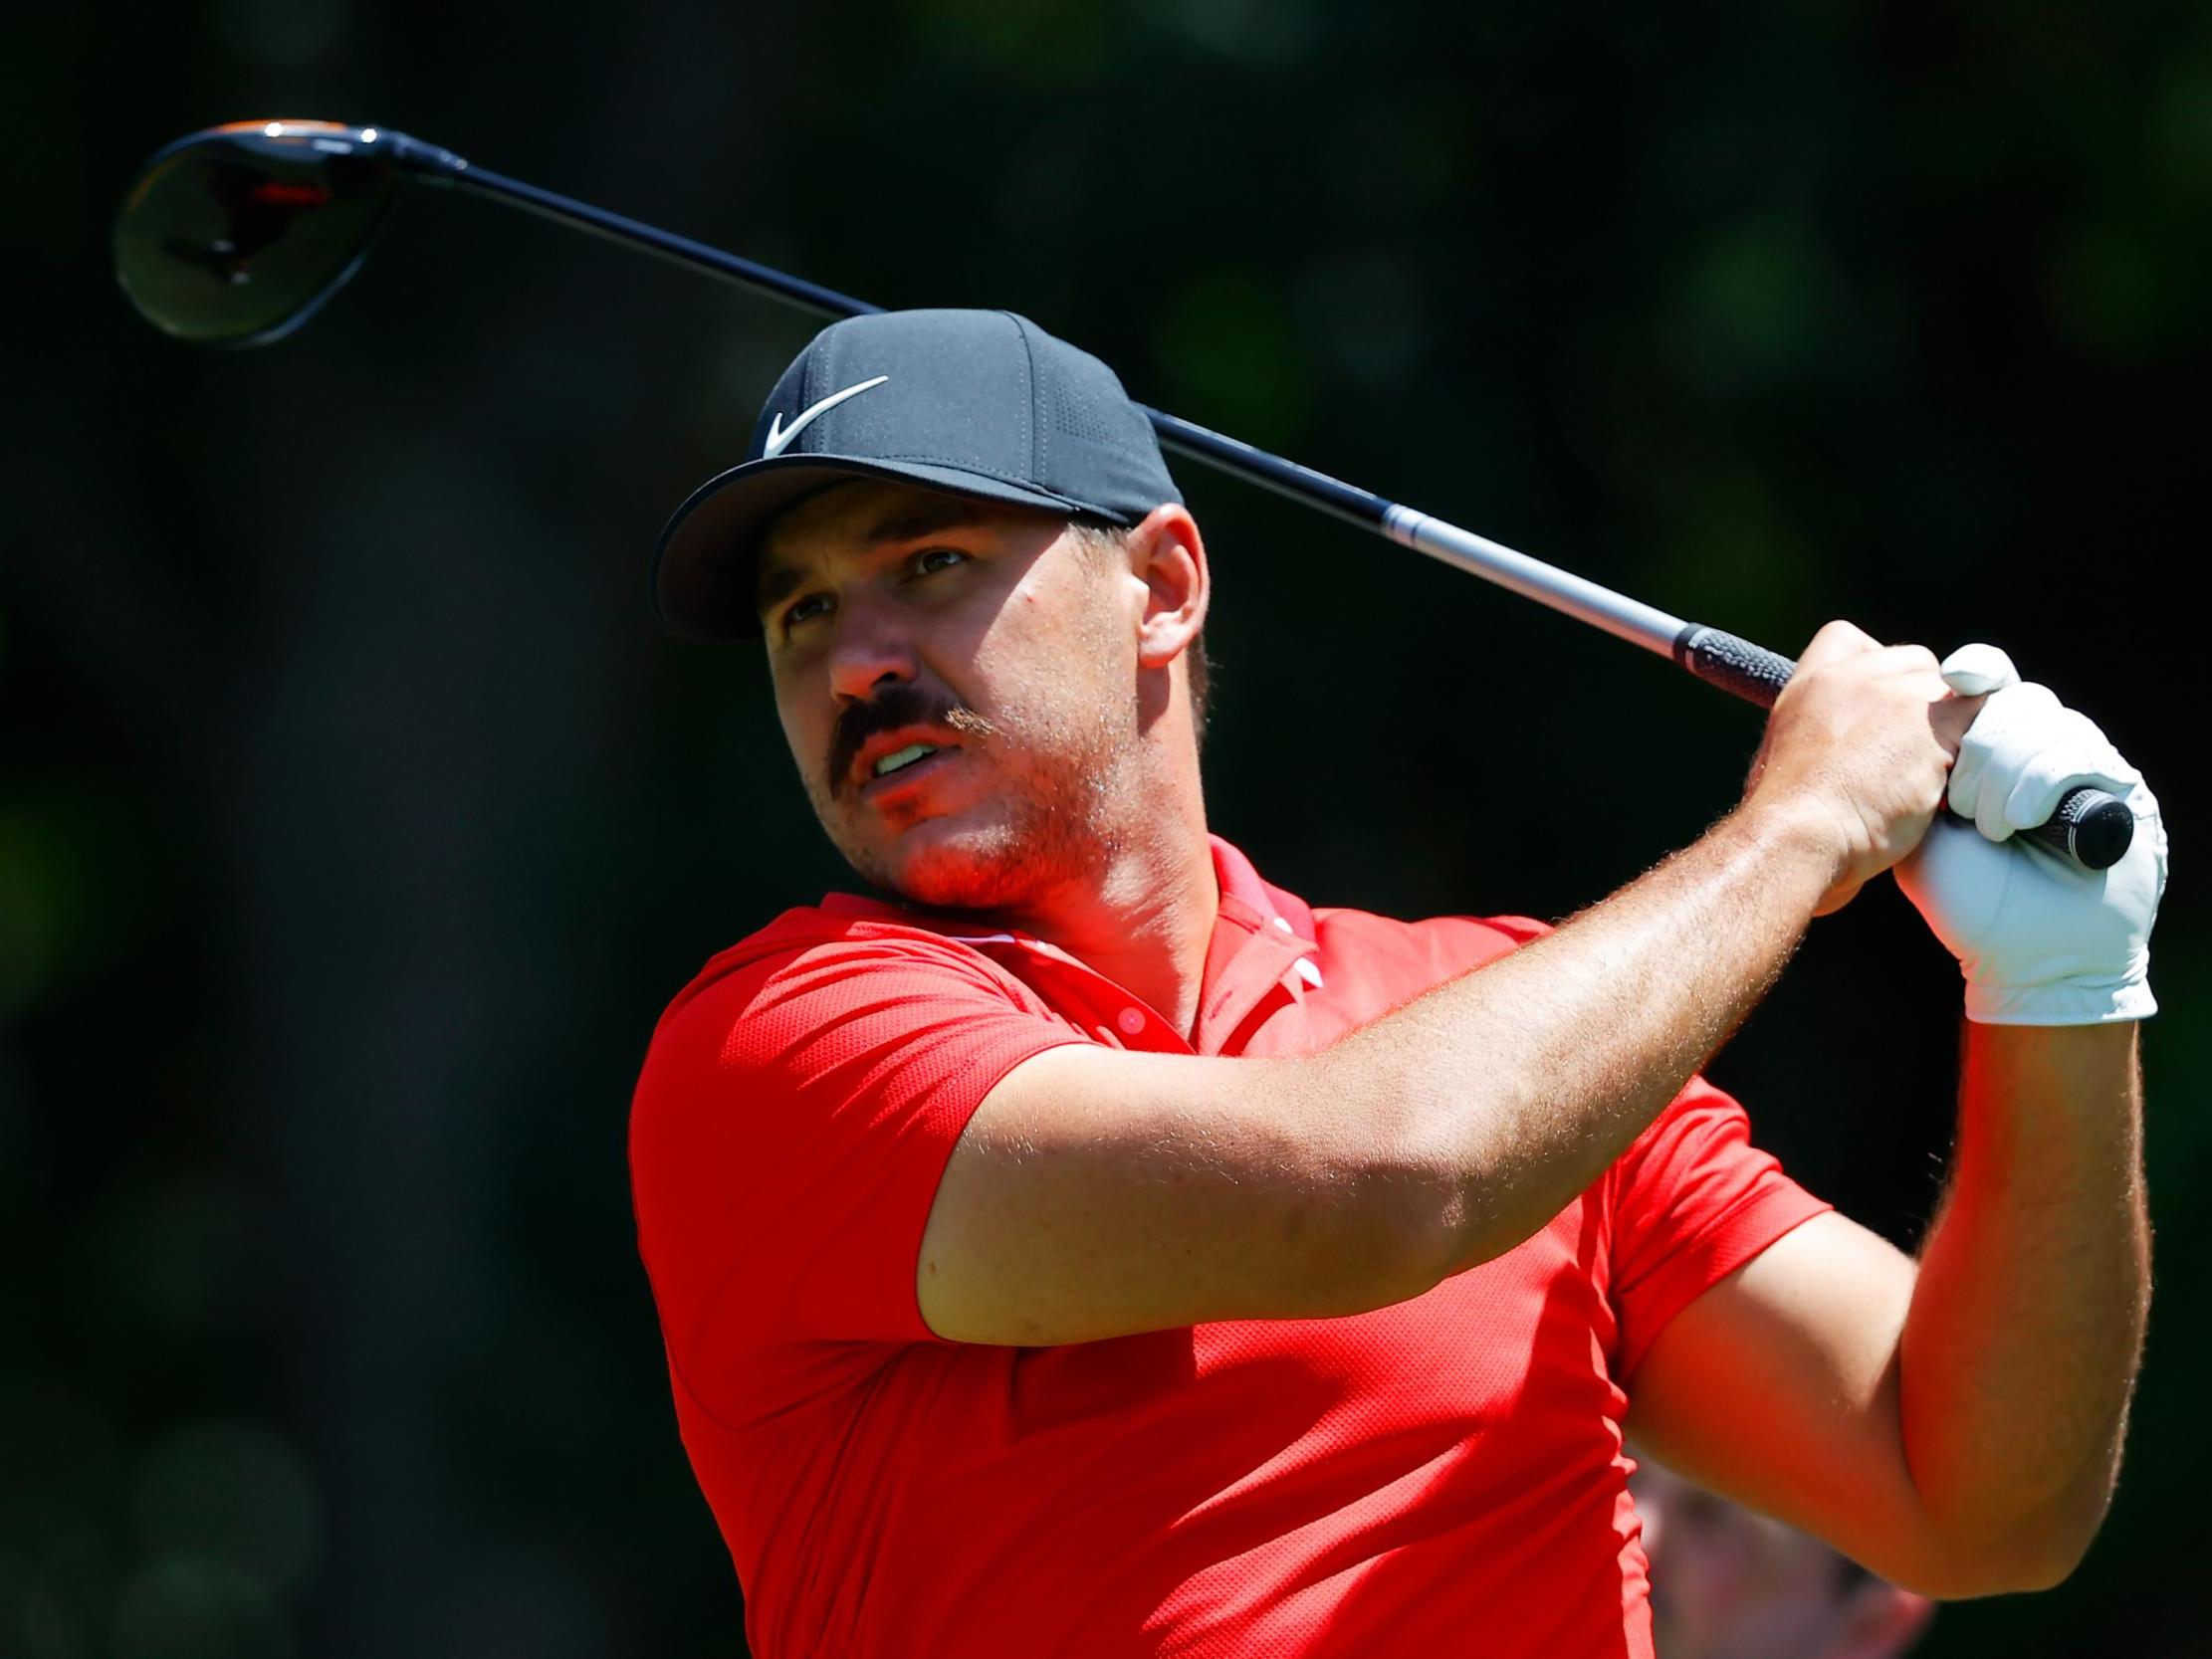 Brooks Koepka insists he is willing to pass on the Ryder Cup if fans do not attend